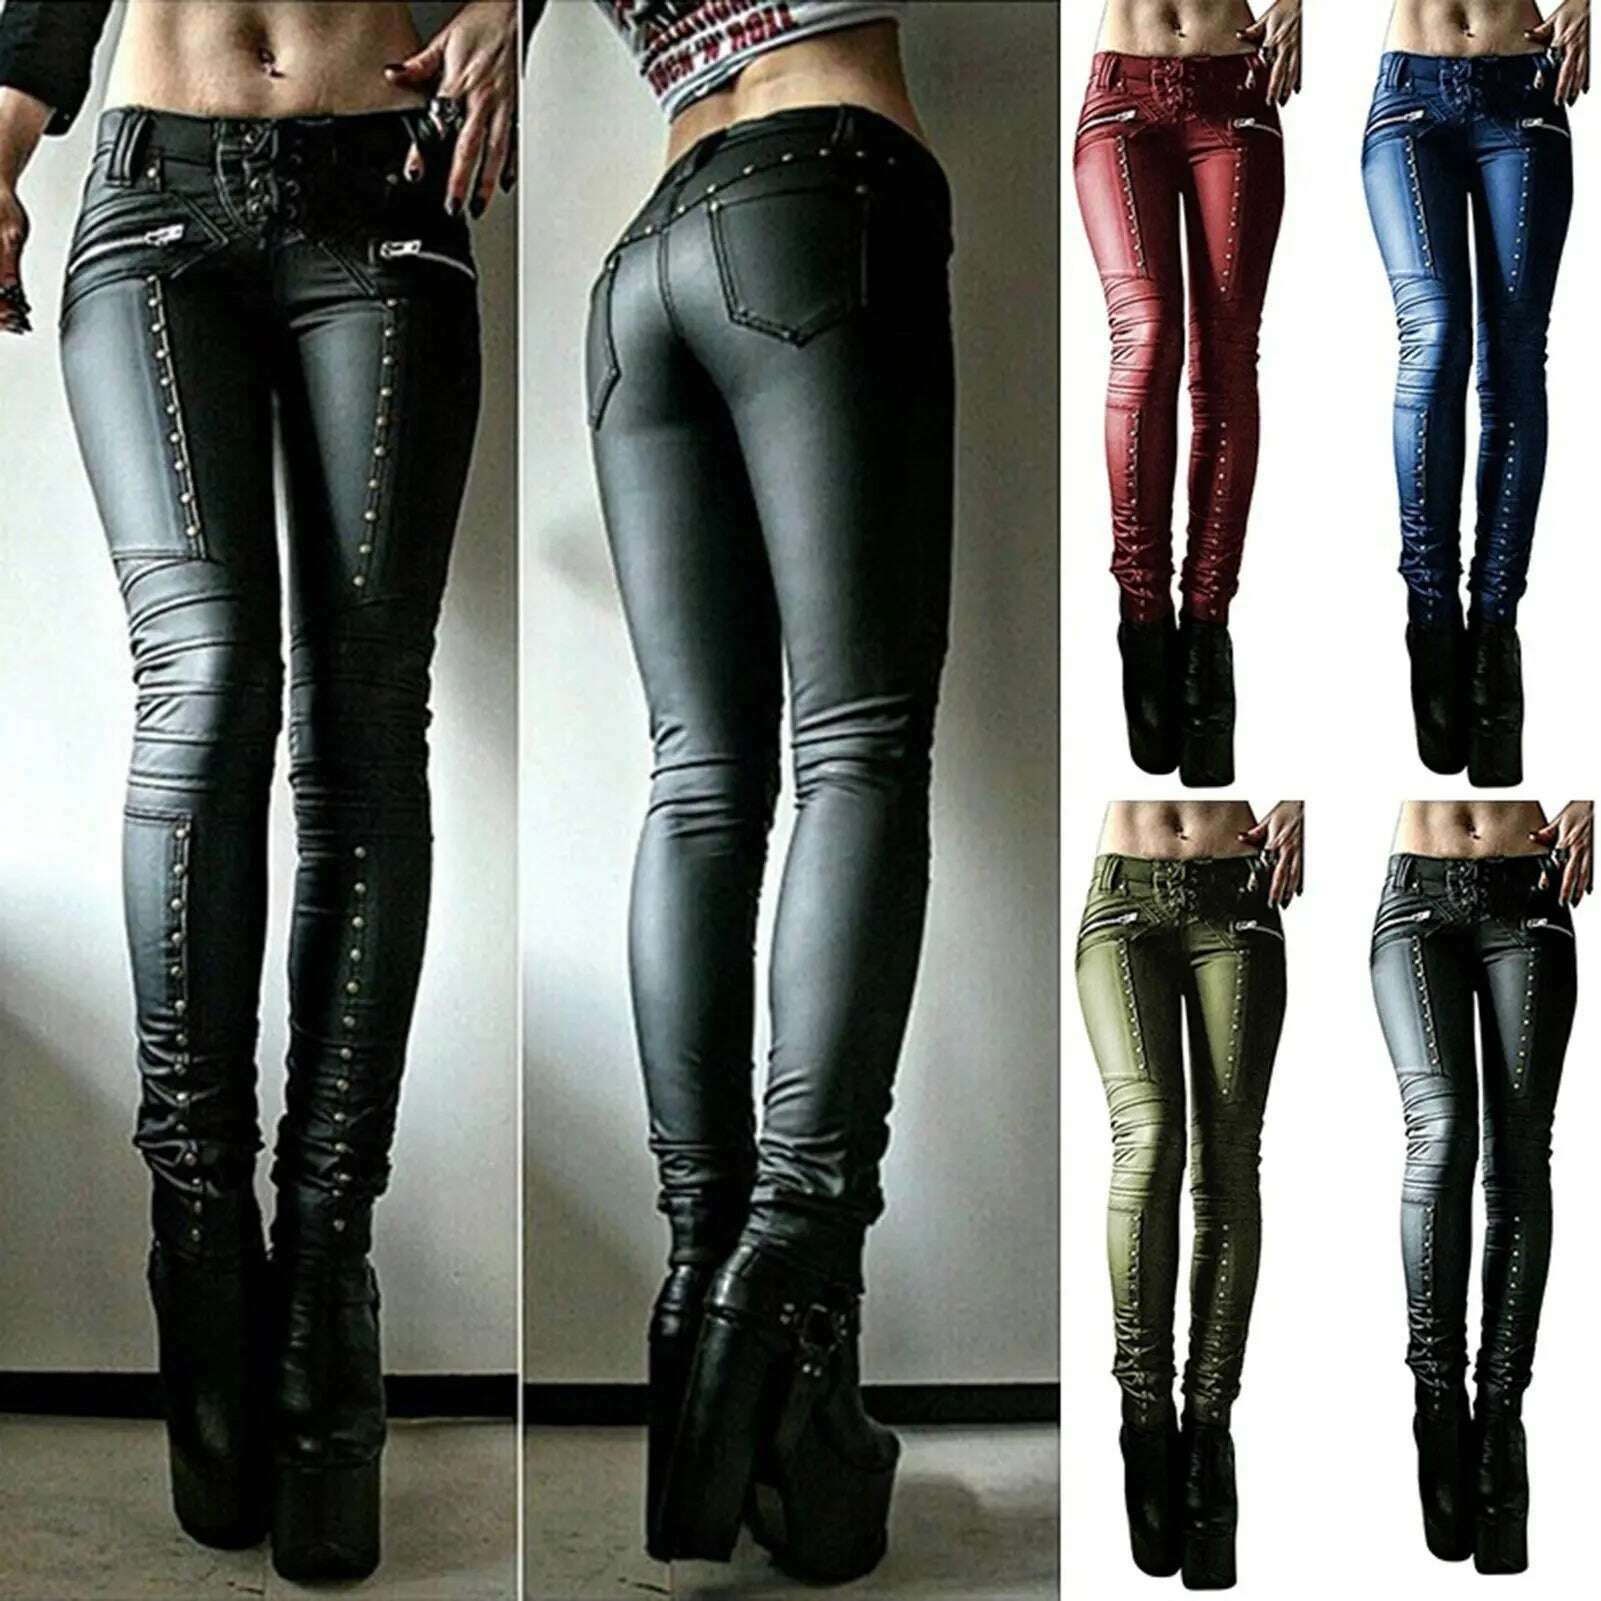 KIMLUD, Women Retro PU Pants Leather steampunk Rivet Zipper Lace up Pencil pants Medieval Gothic Skinny Streetwear Autumn Casual Trouse, KIMLUD Womens Clothes